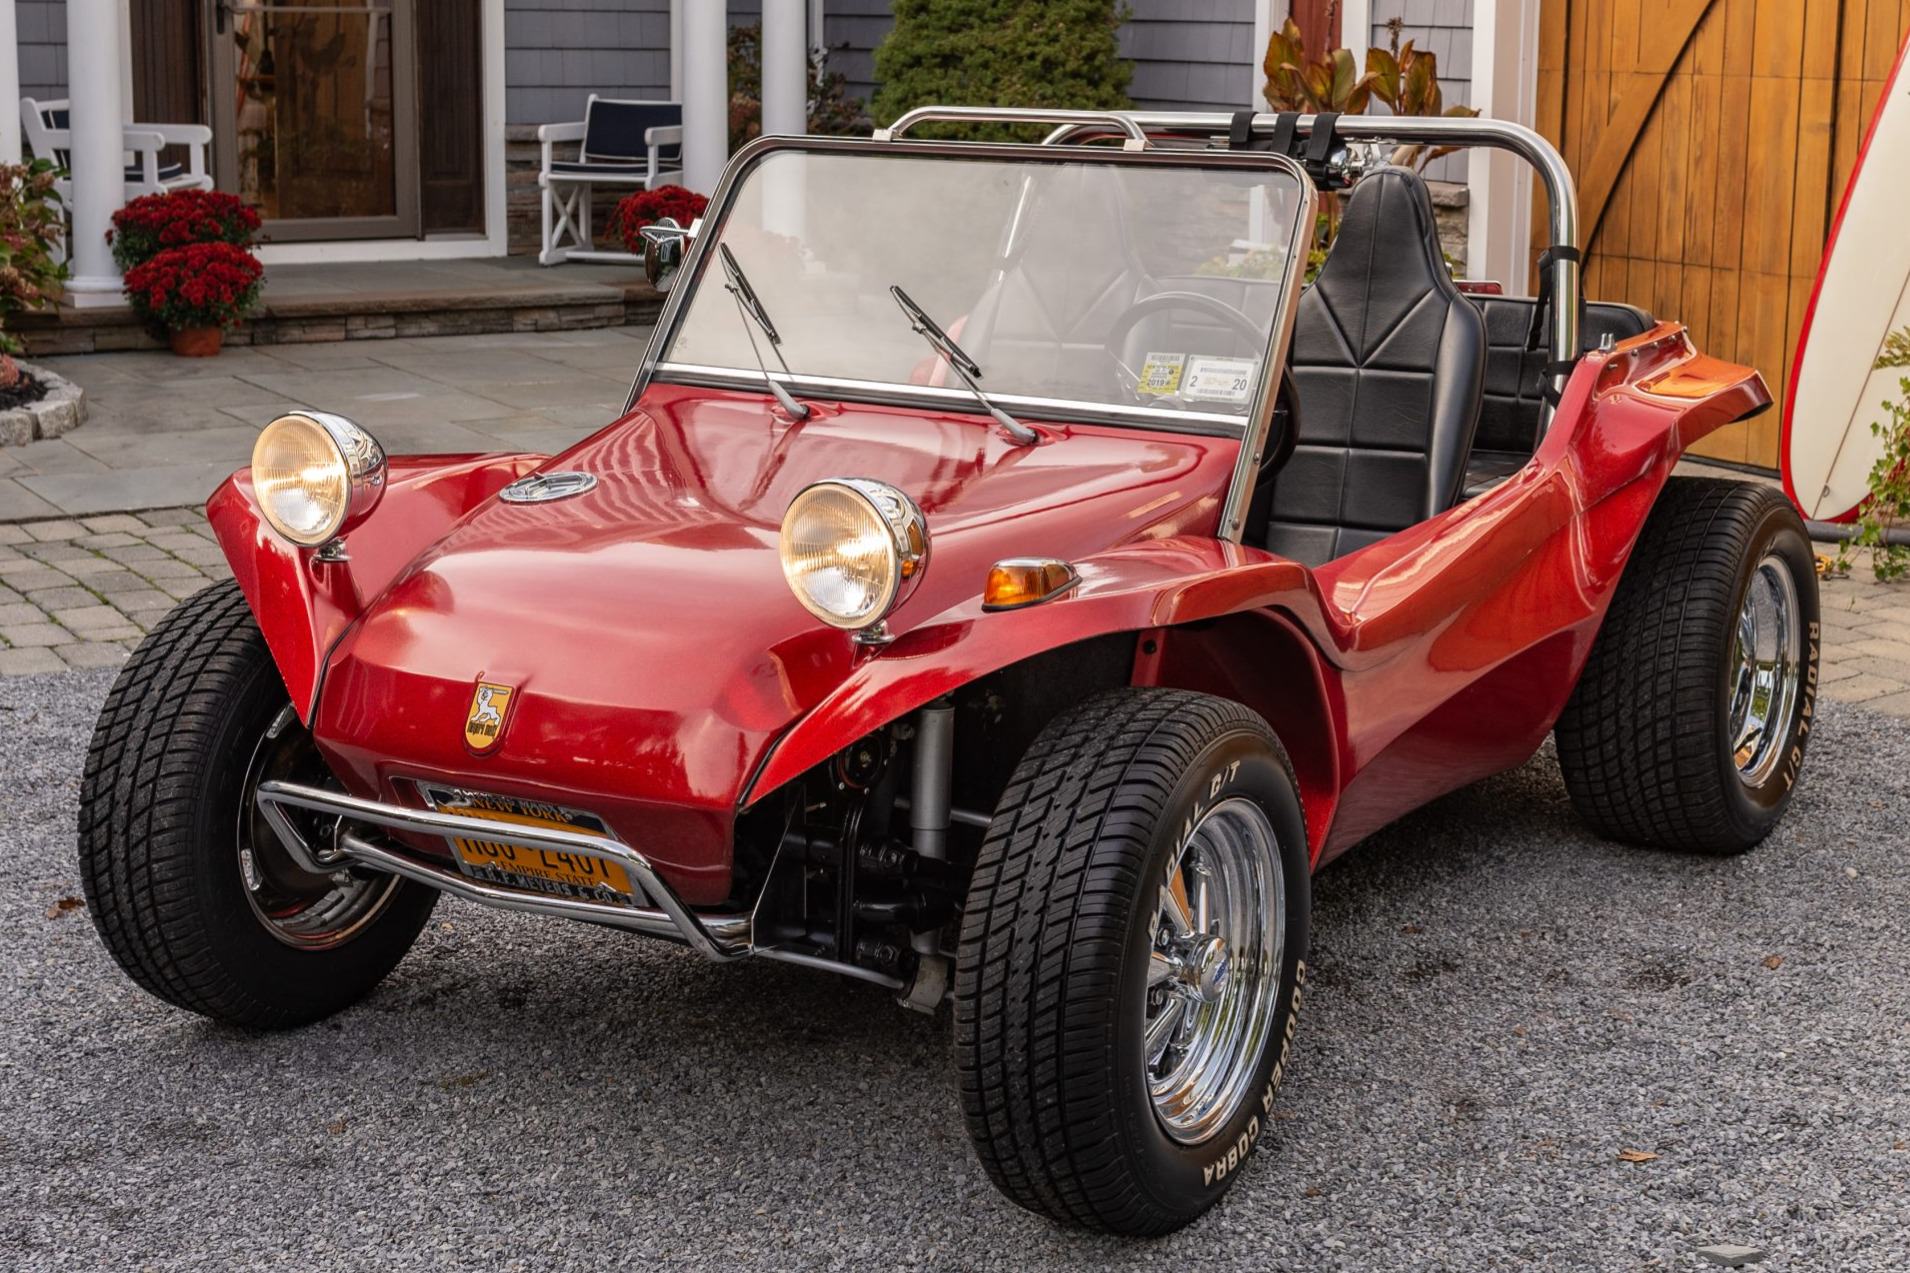 dune buggies for sale